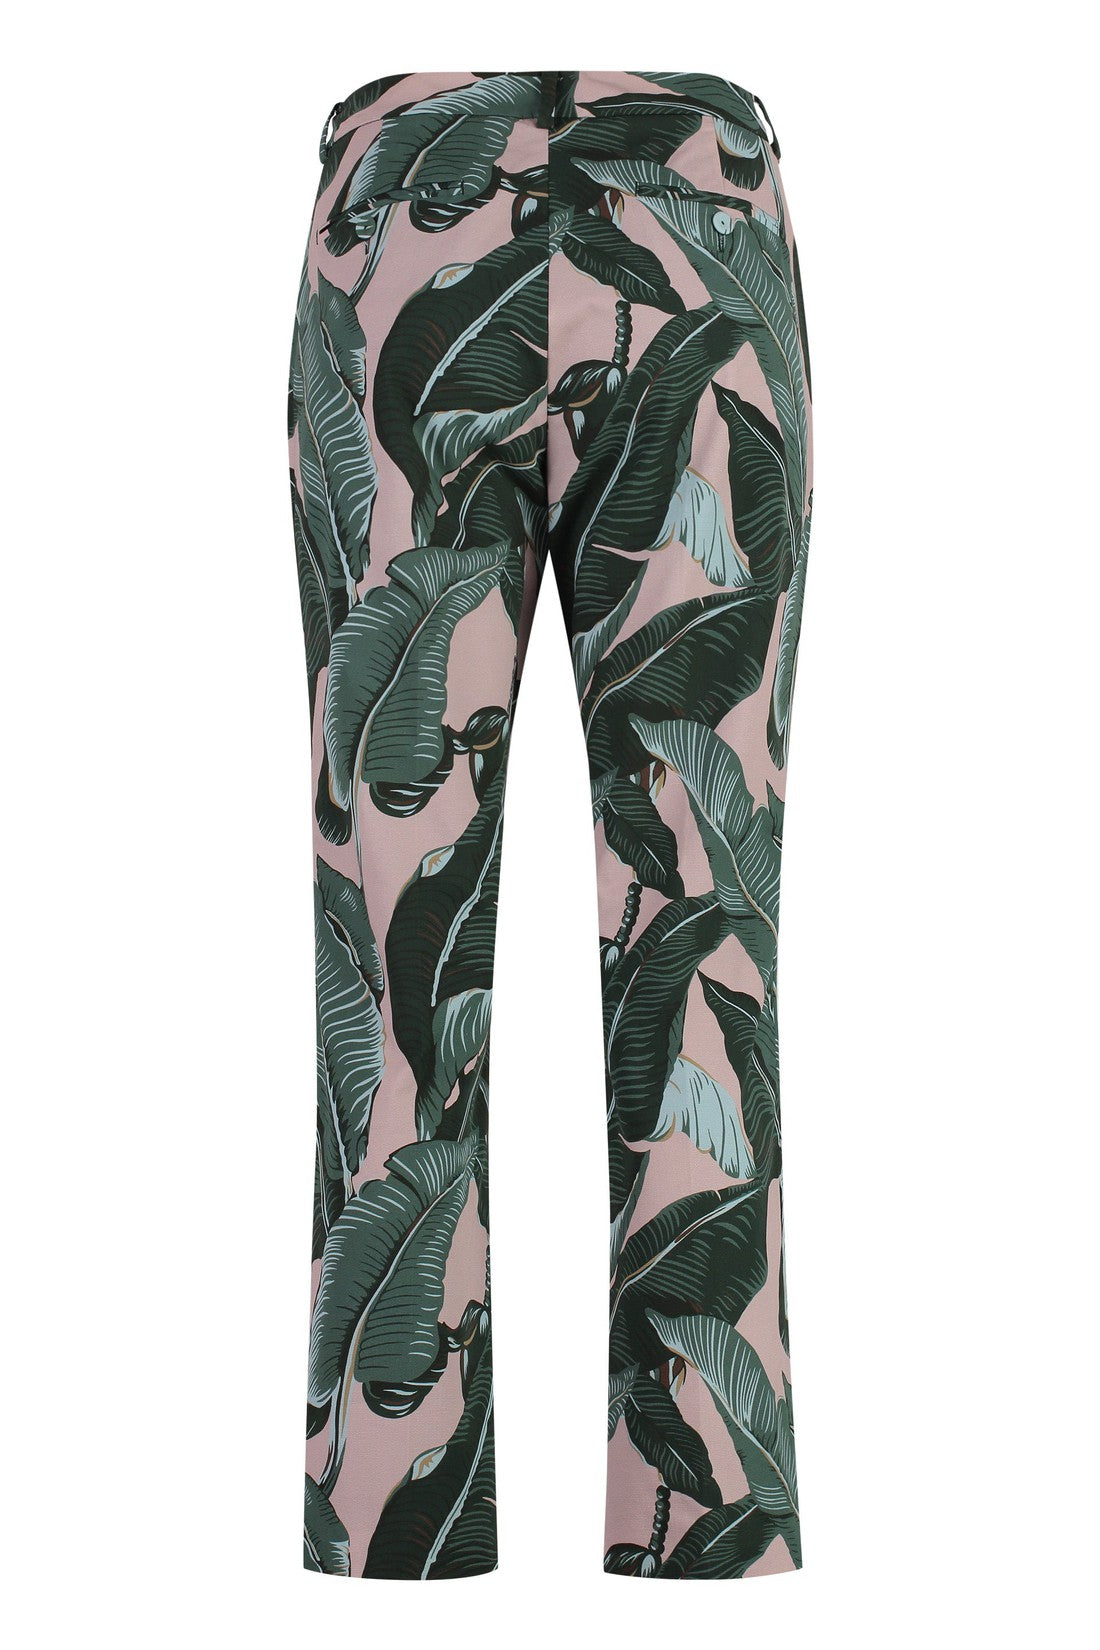 Weekend Max Mara-OUTLET-SALE-Okra printed cotton trousers-ARCHIVIST